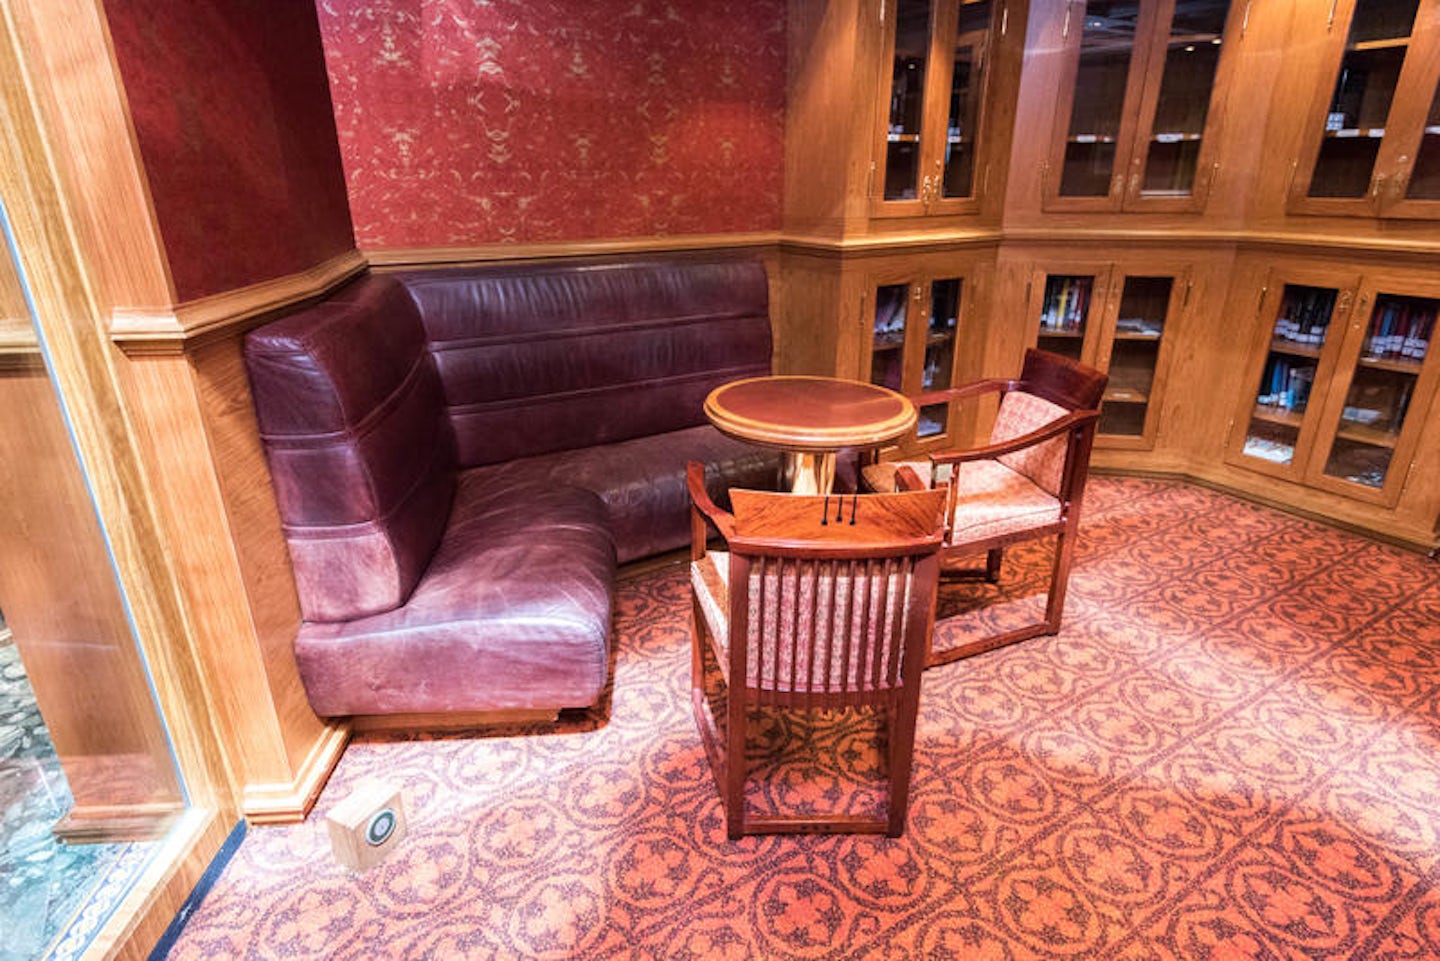 Antiquarian Library on Carnival Liberty